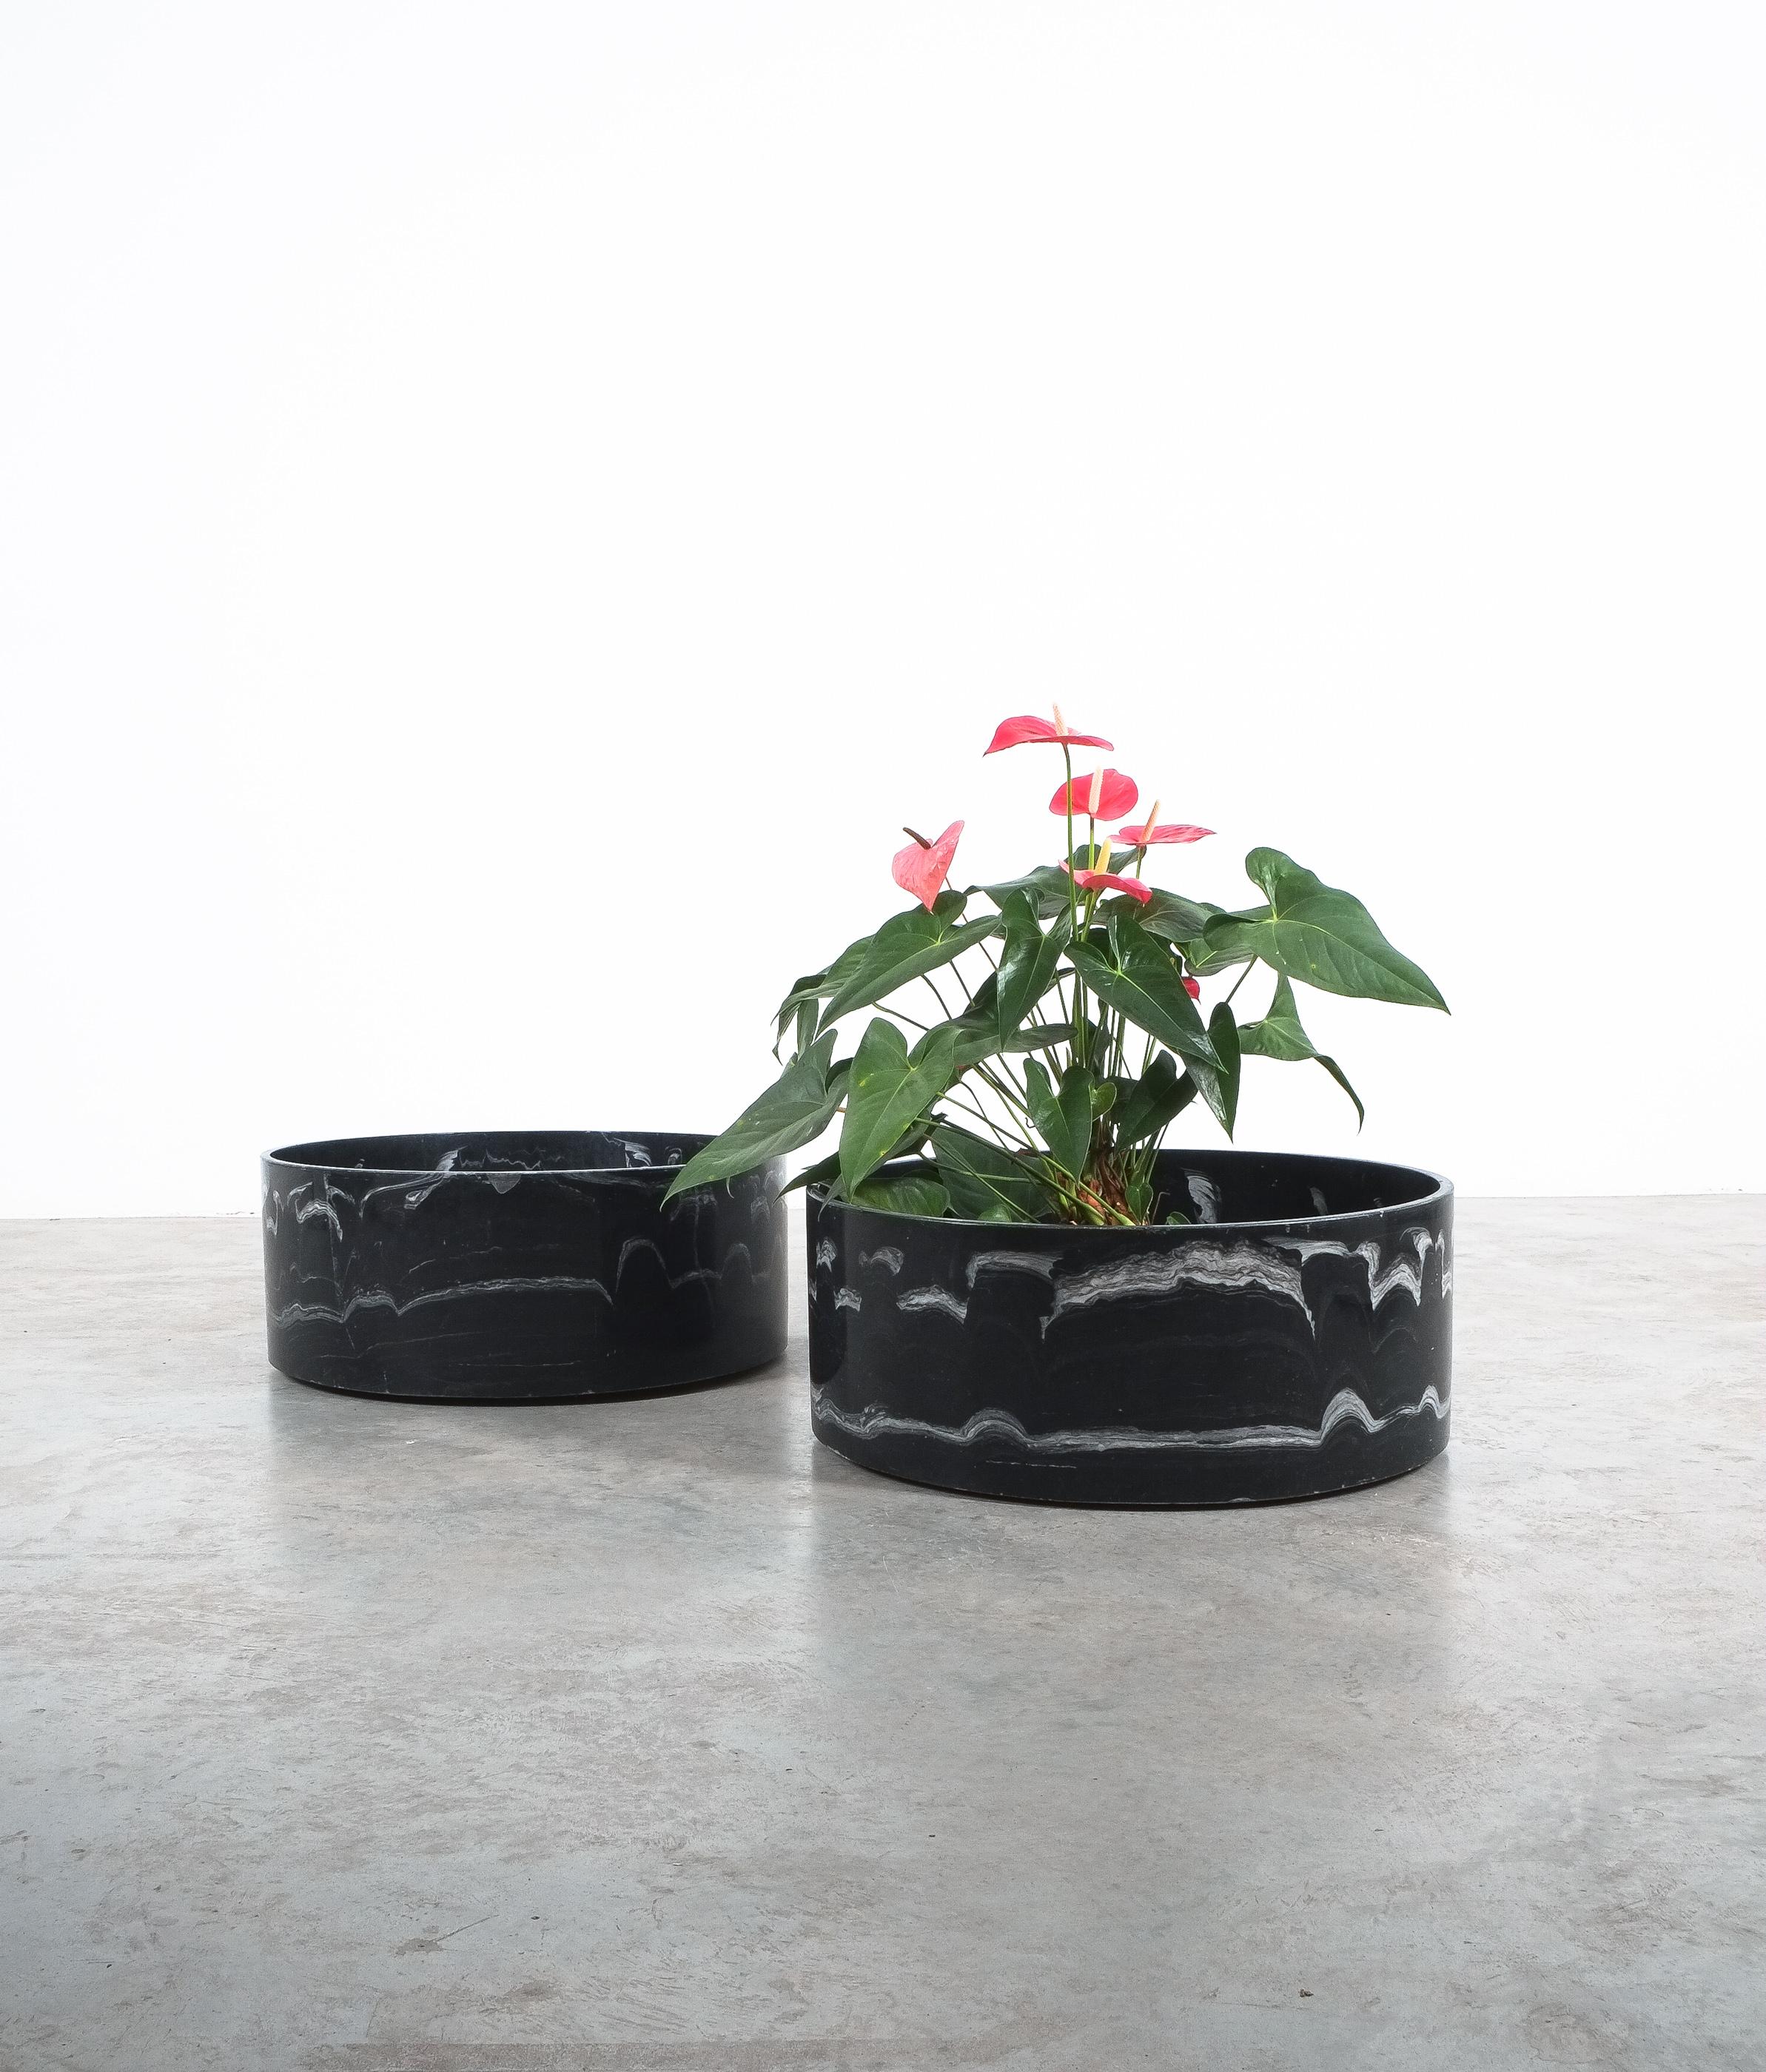 Rare and large black cast marble planters (2)- sold per piece
We have the same pieces in white cast marble (2), a total of 4 planter, two of each, black + white, all sold and priced per piece

Stunning 27